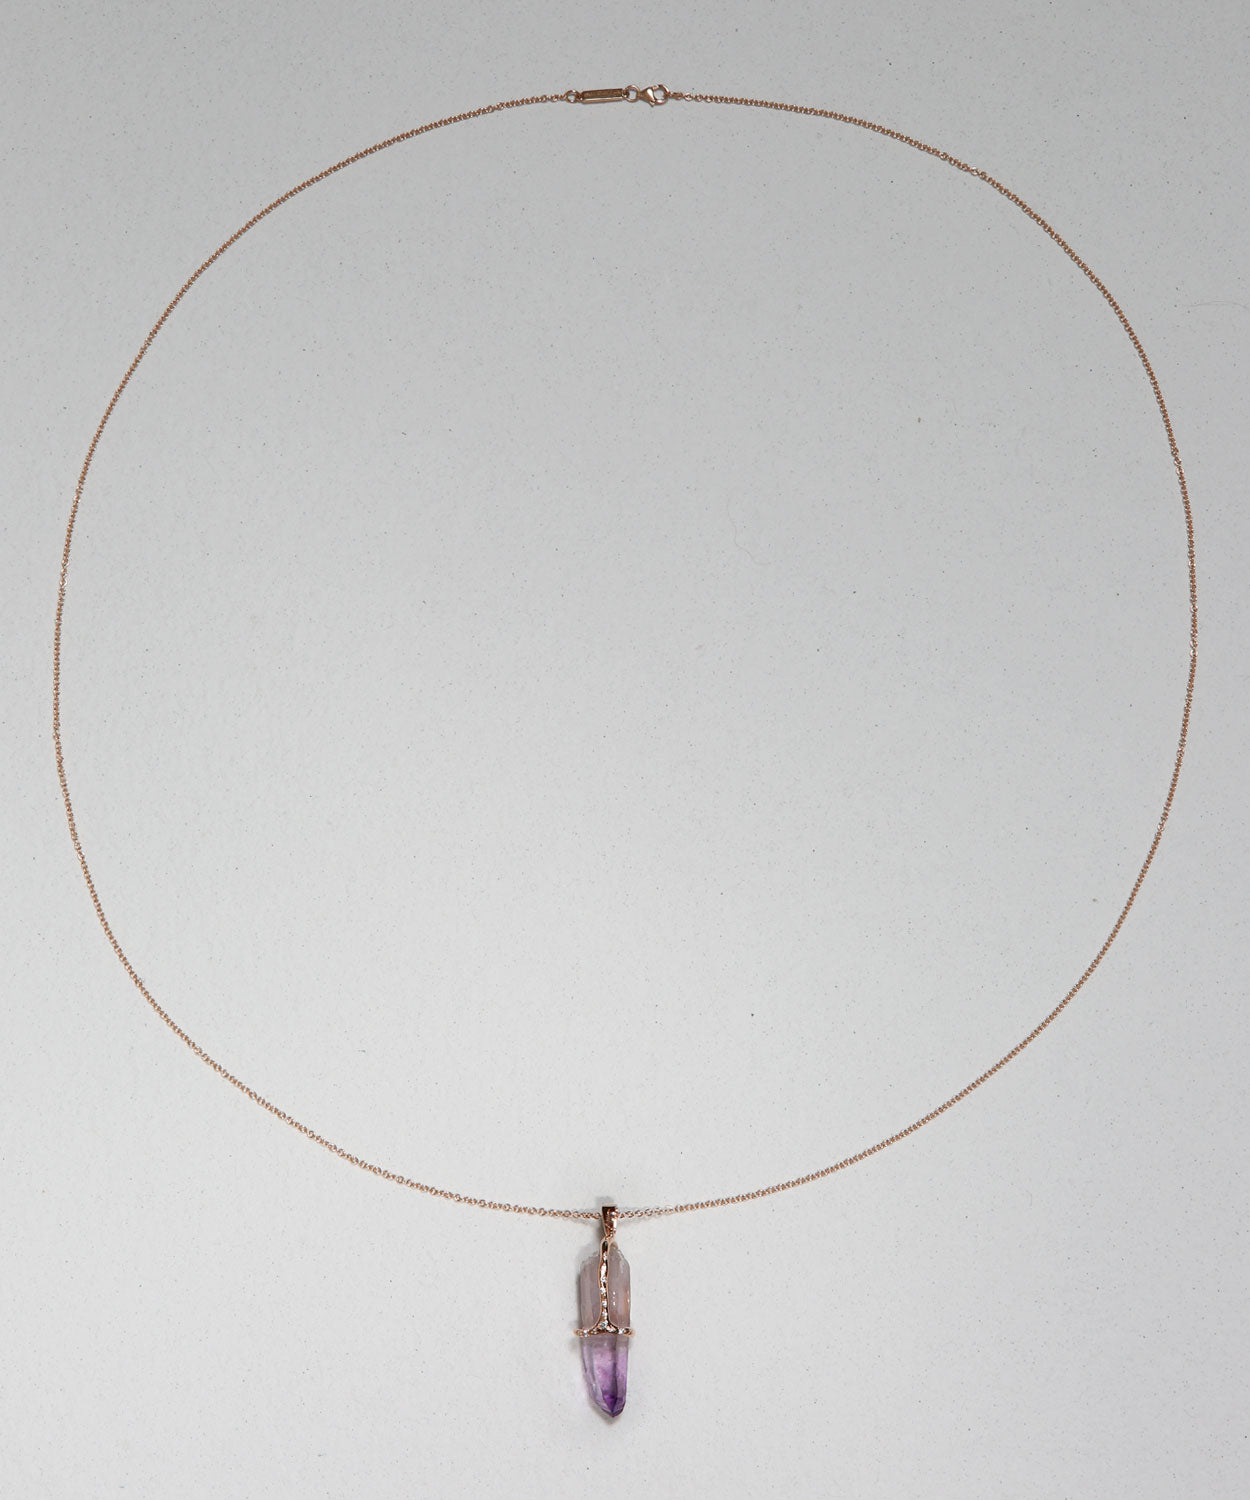 Amethyst Healing Stone Necklace